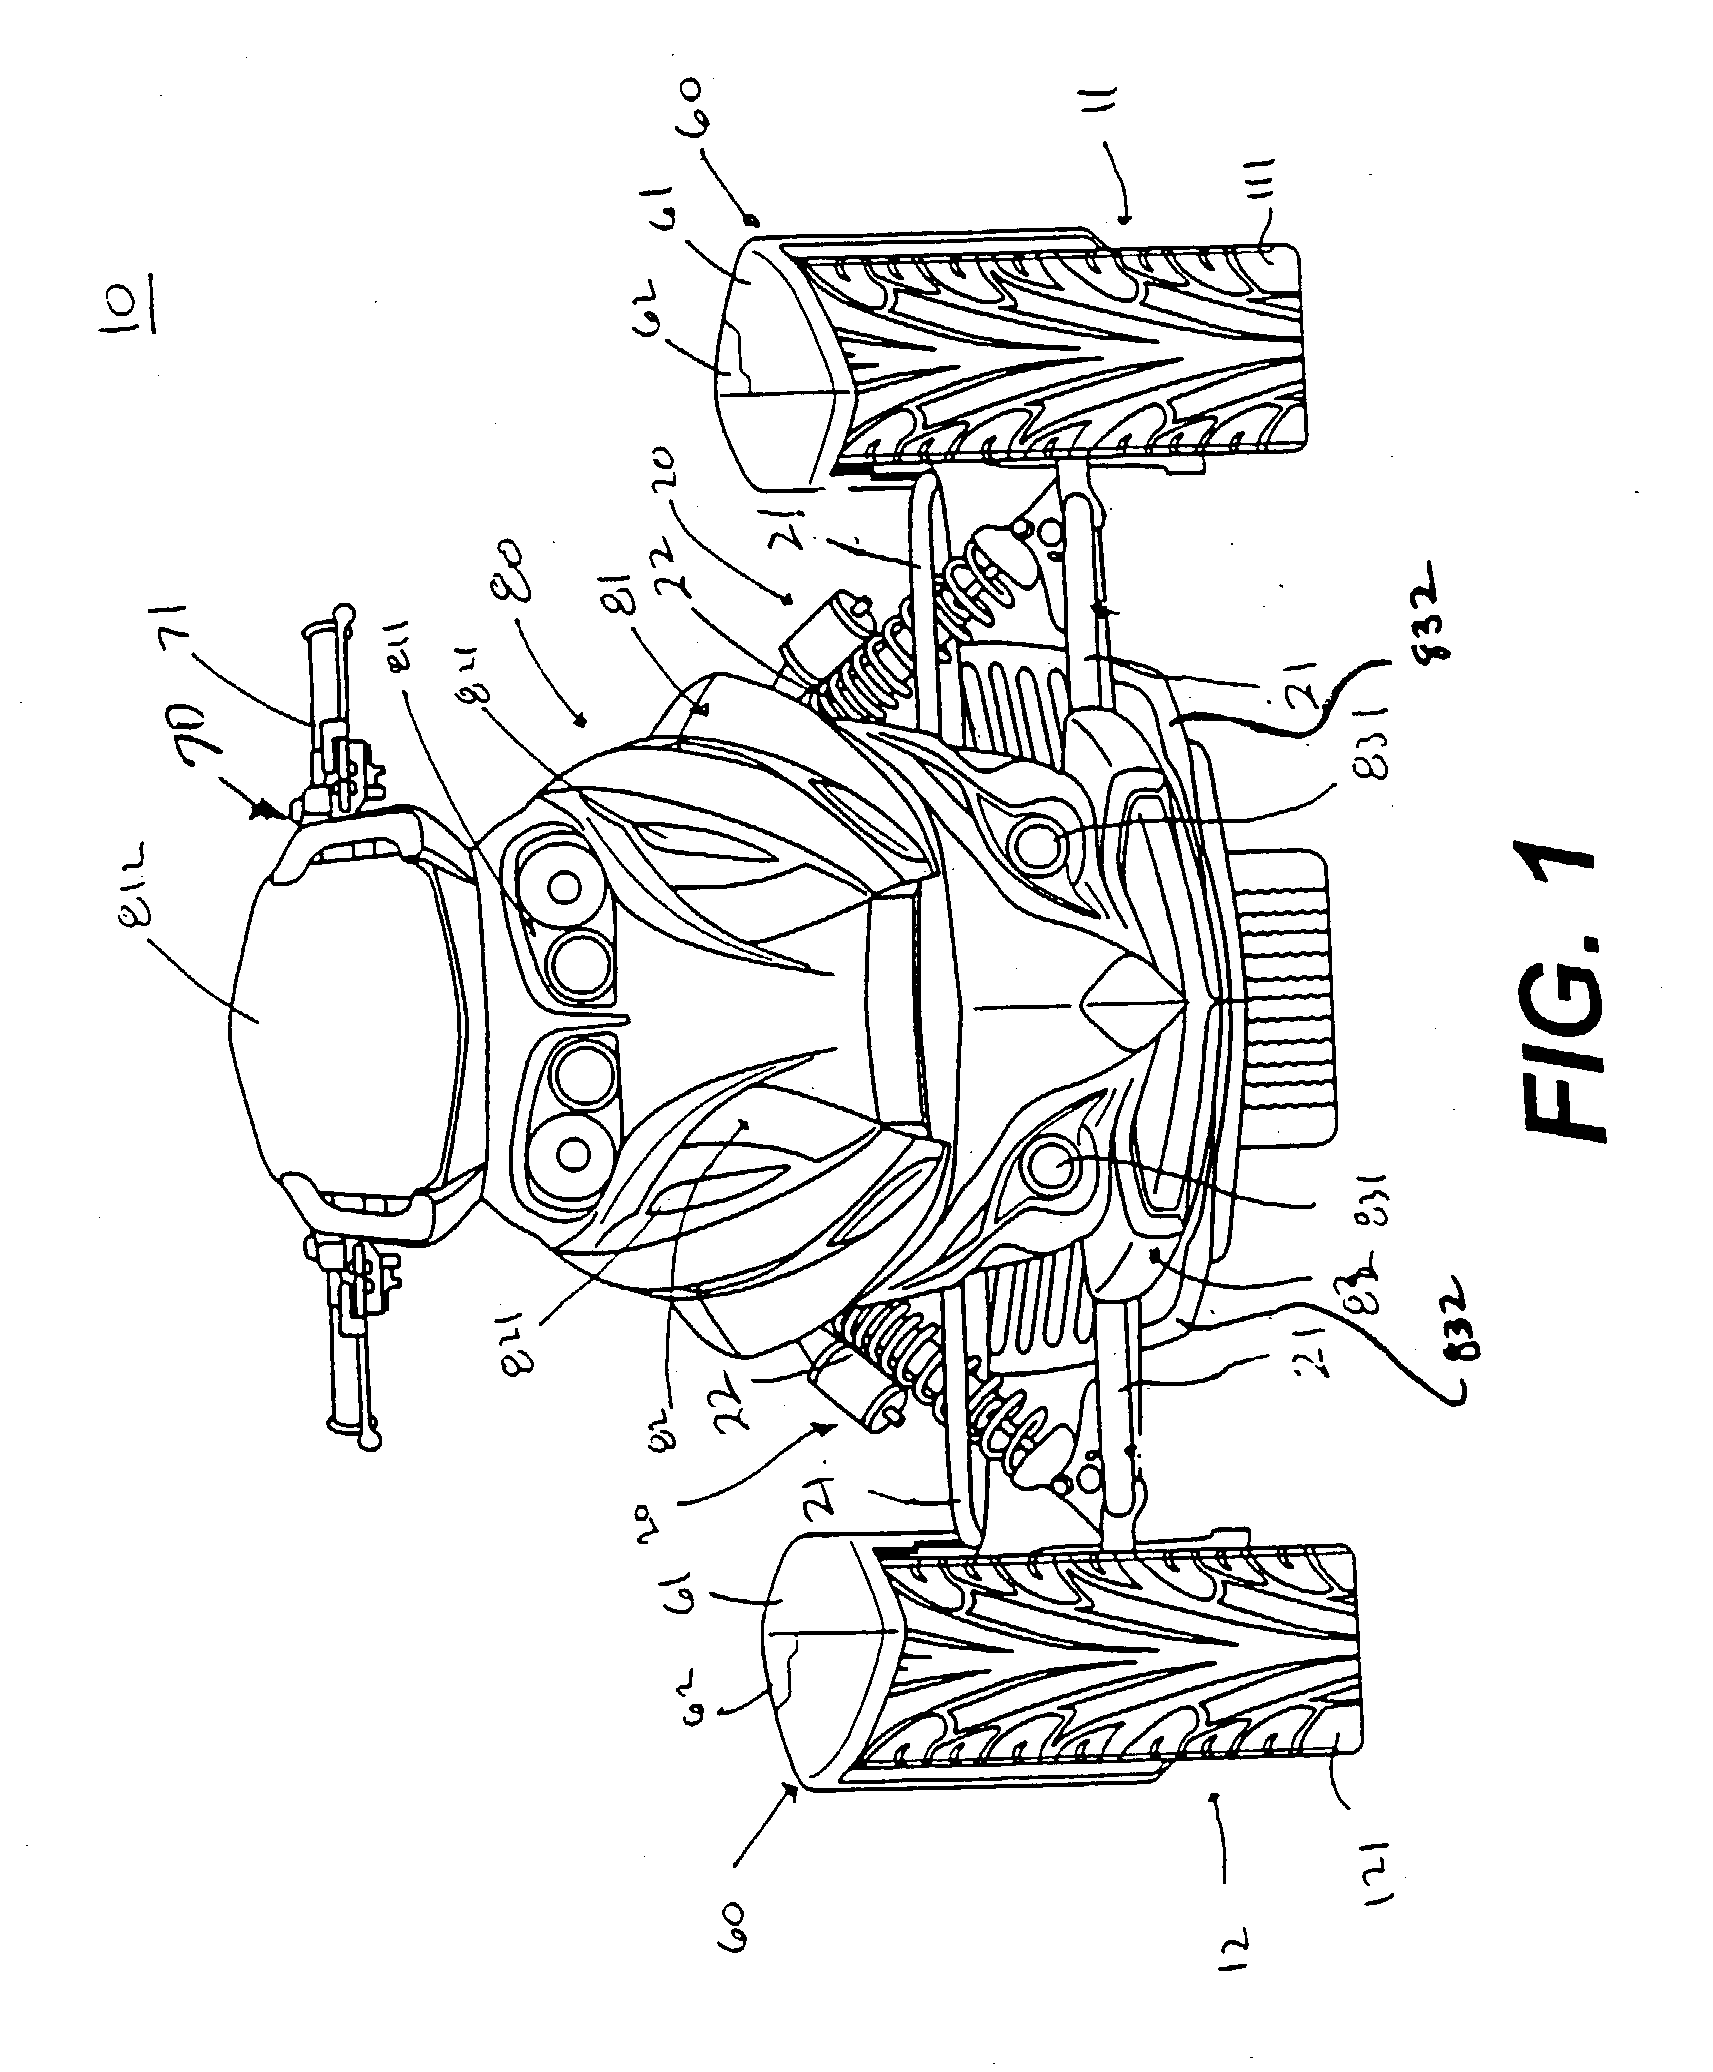 Three-wheeled vehicle with a continuously variable transmission